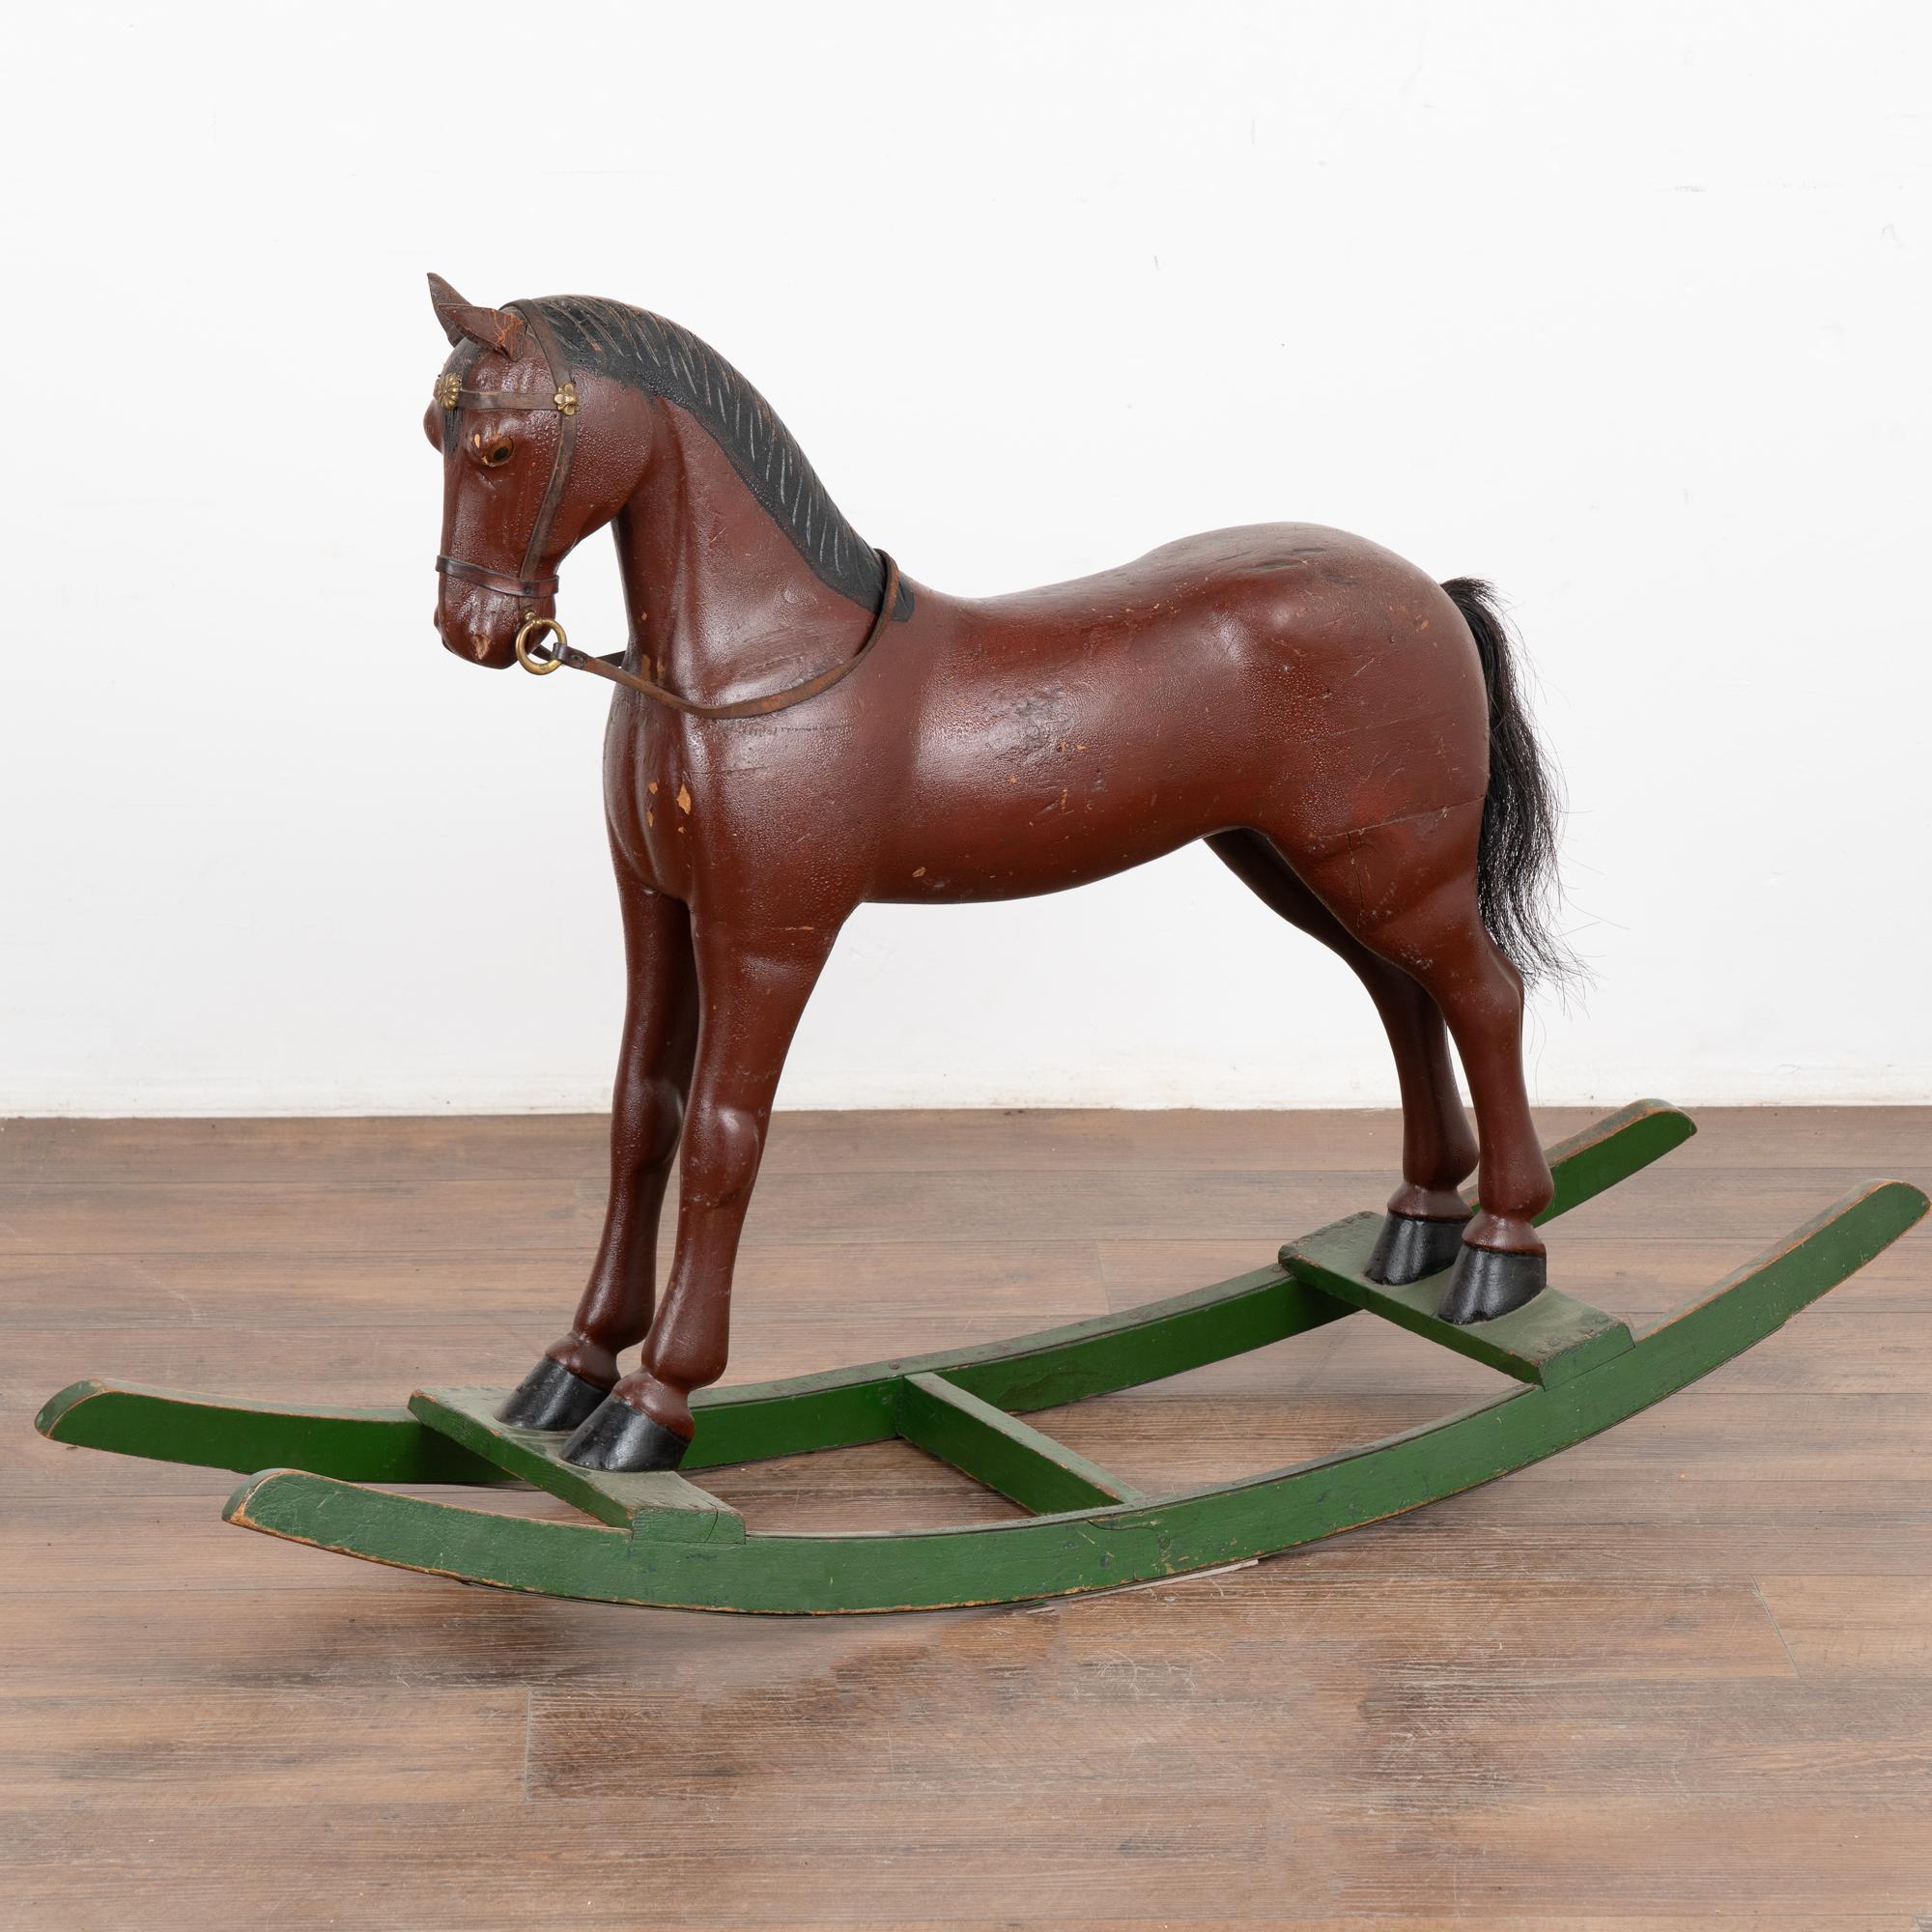 It is the worn look that creates the wonderful appeal of this original painted and carved rocking horse from Sweden.
The brown/brick paint has been distressed (some missing, see photo of direct front). Note also the cracked leather ears, carved and